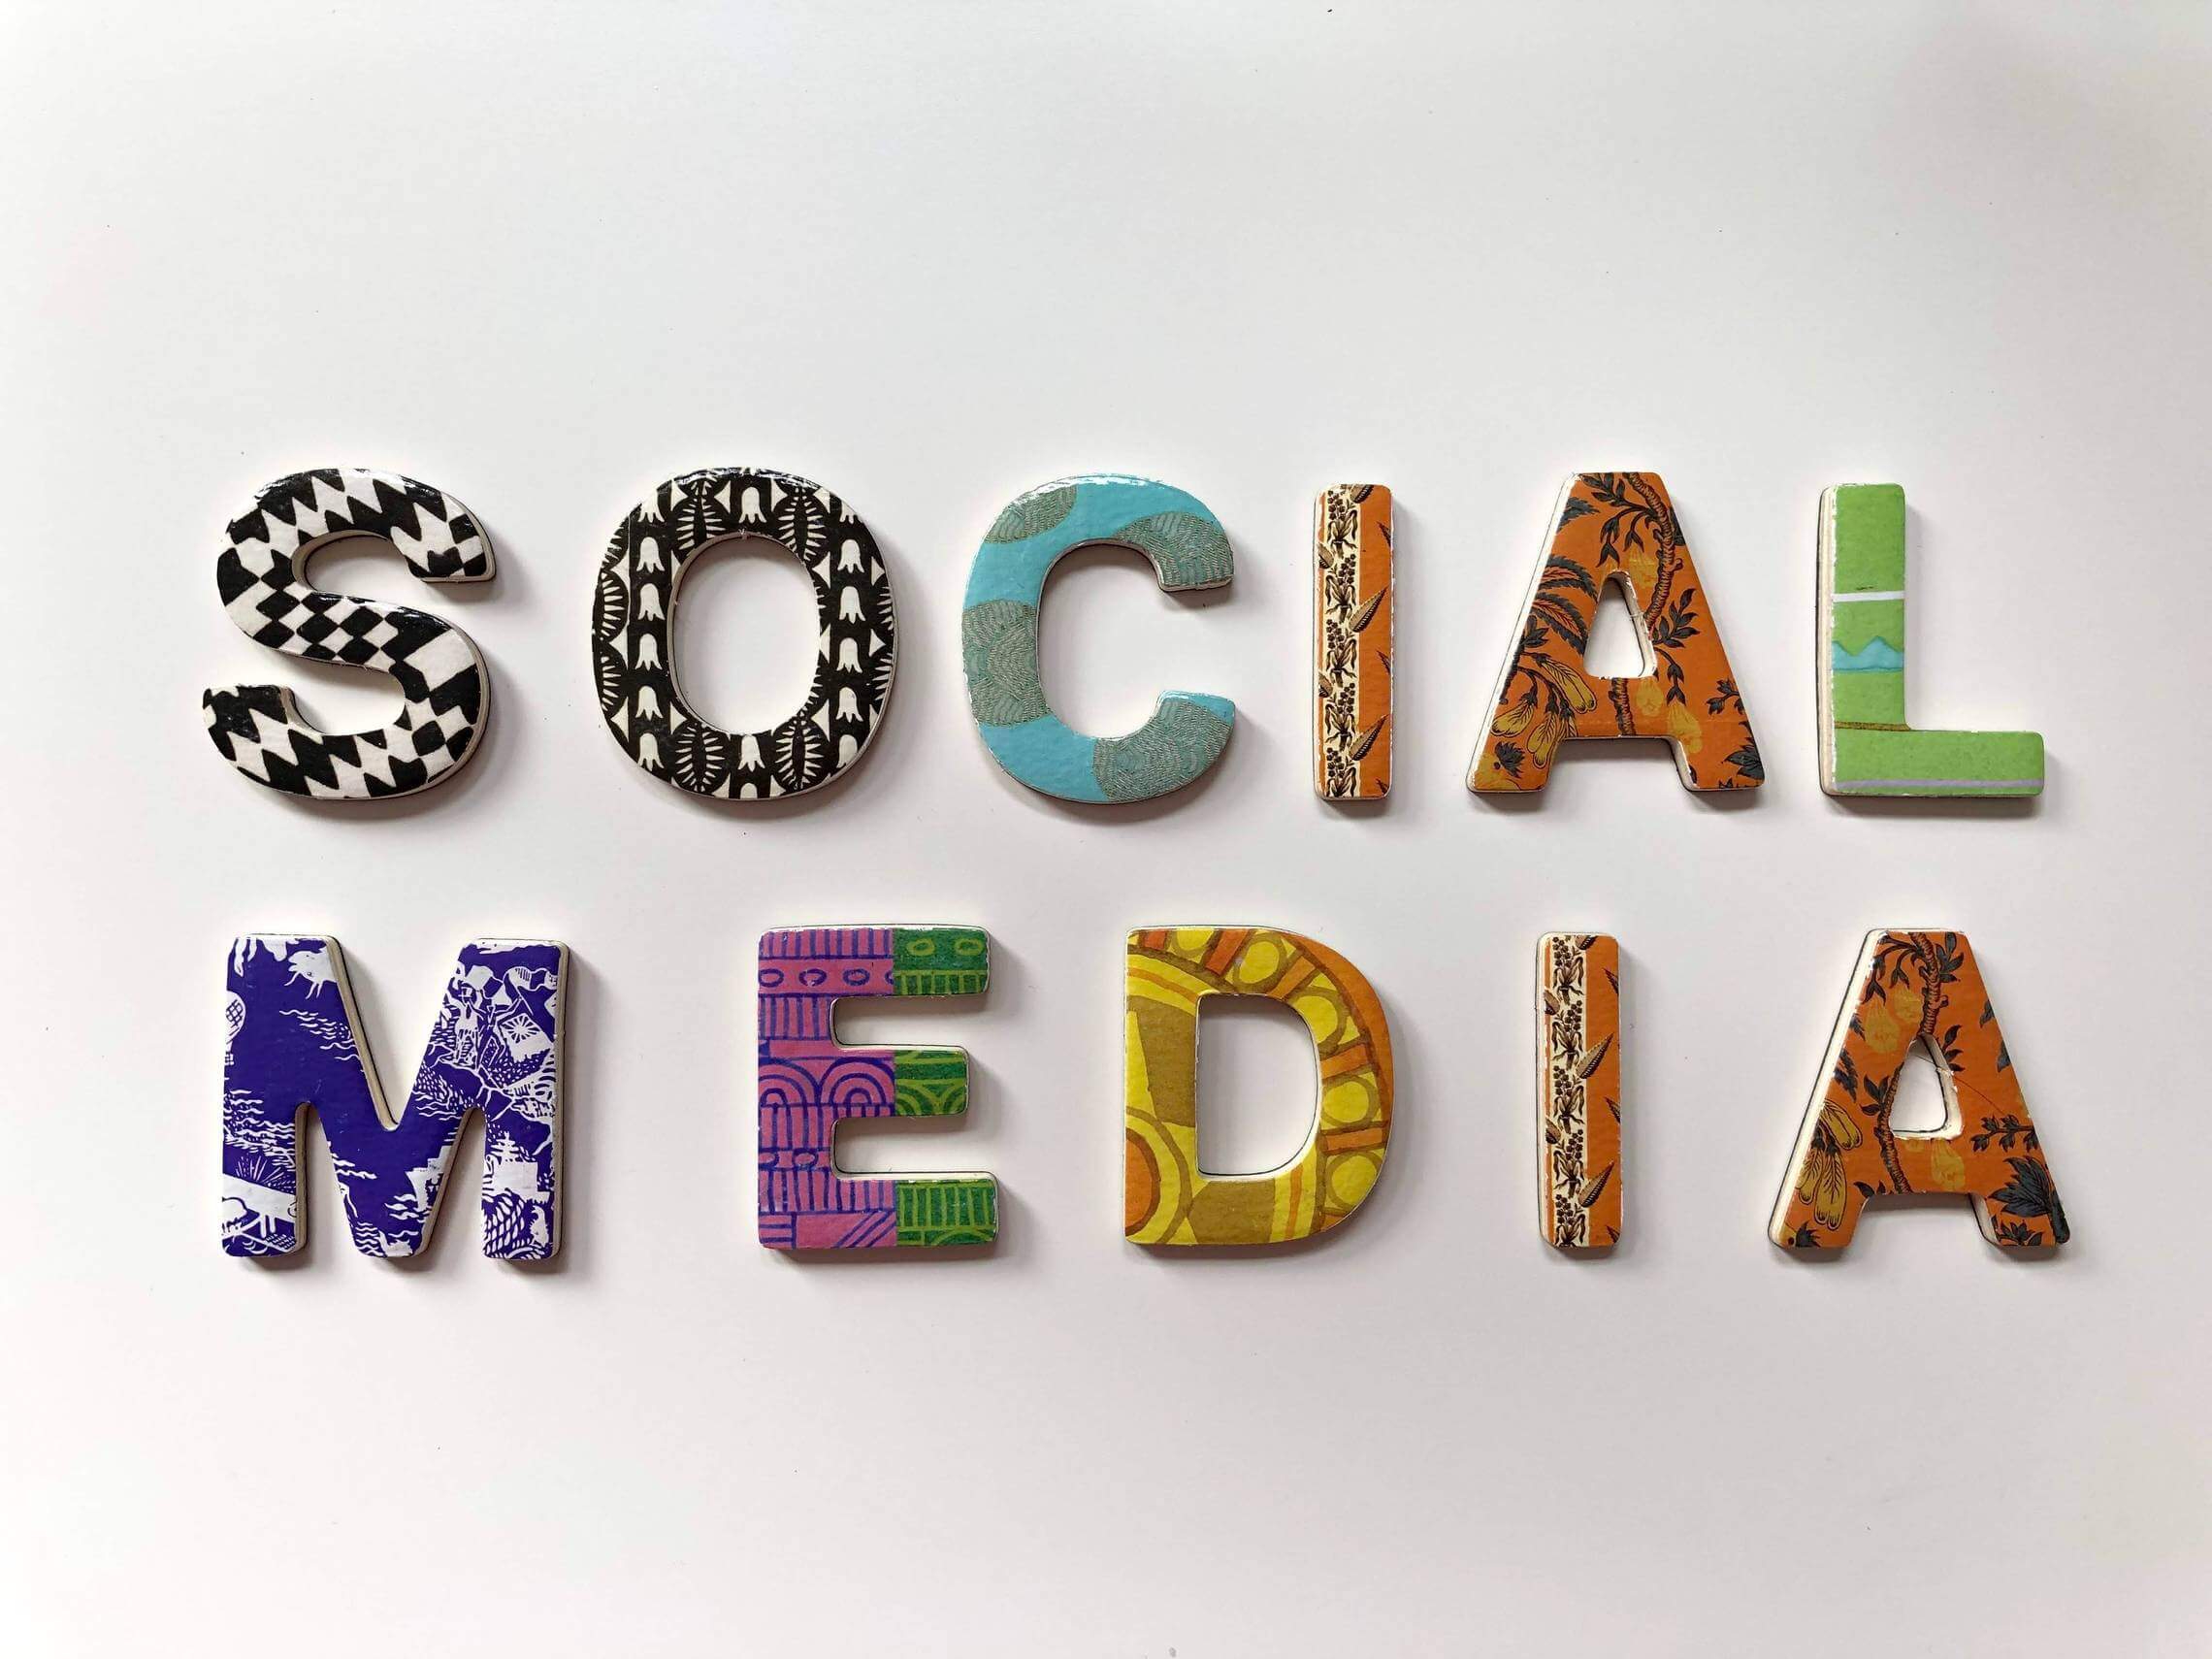 Some tips on social media marketing for any business